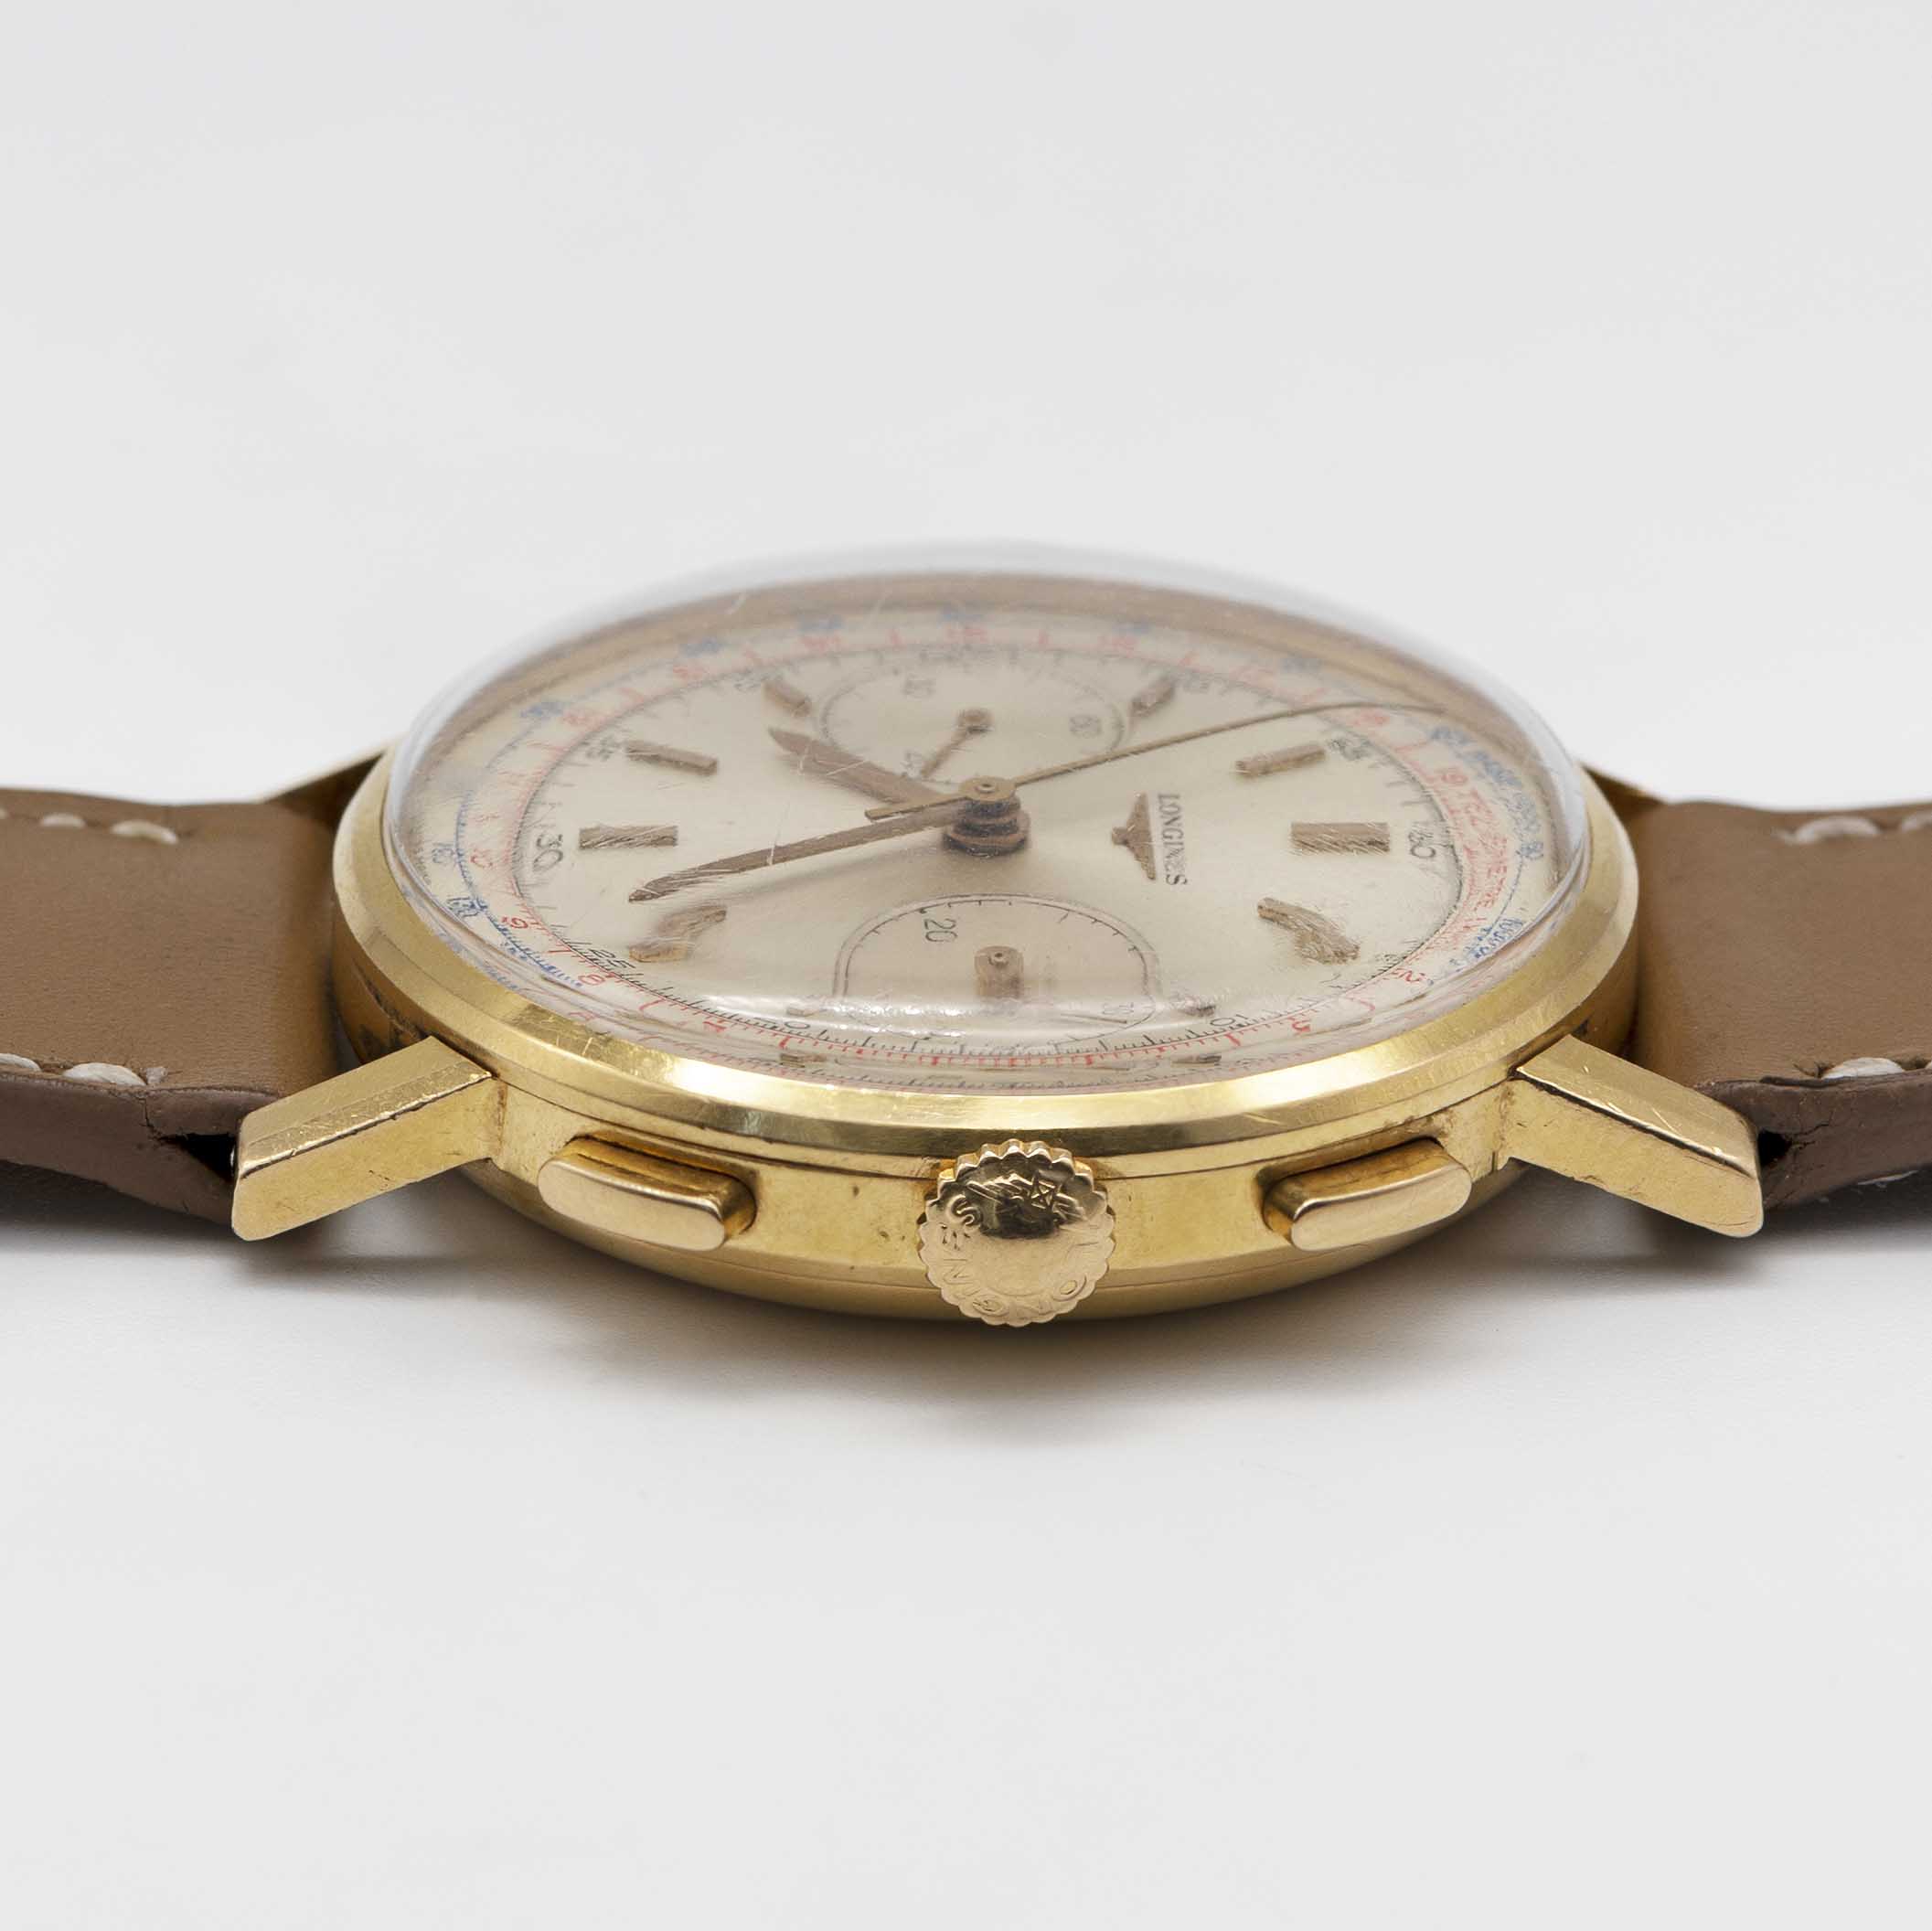 A GENTLEMAN'S 18K SOLID YELLOW GOLD LONGINES FLYBACK CHRONOGRAPH WRIST WATCH DATED 1969, REF. 7414 - Image 8 of 9